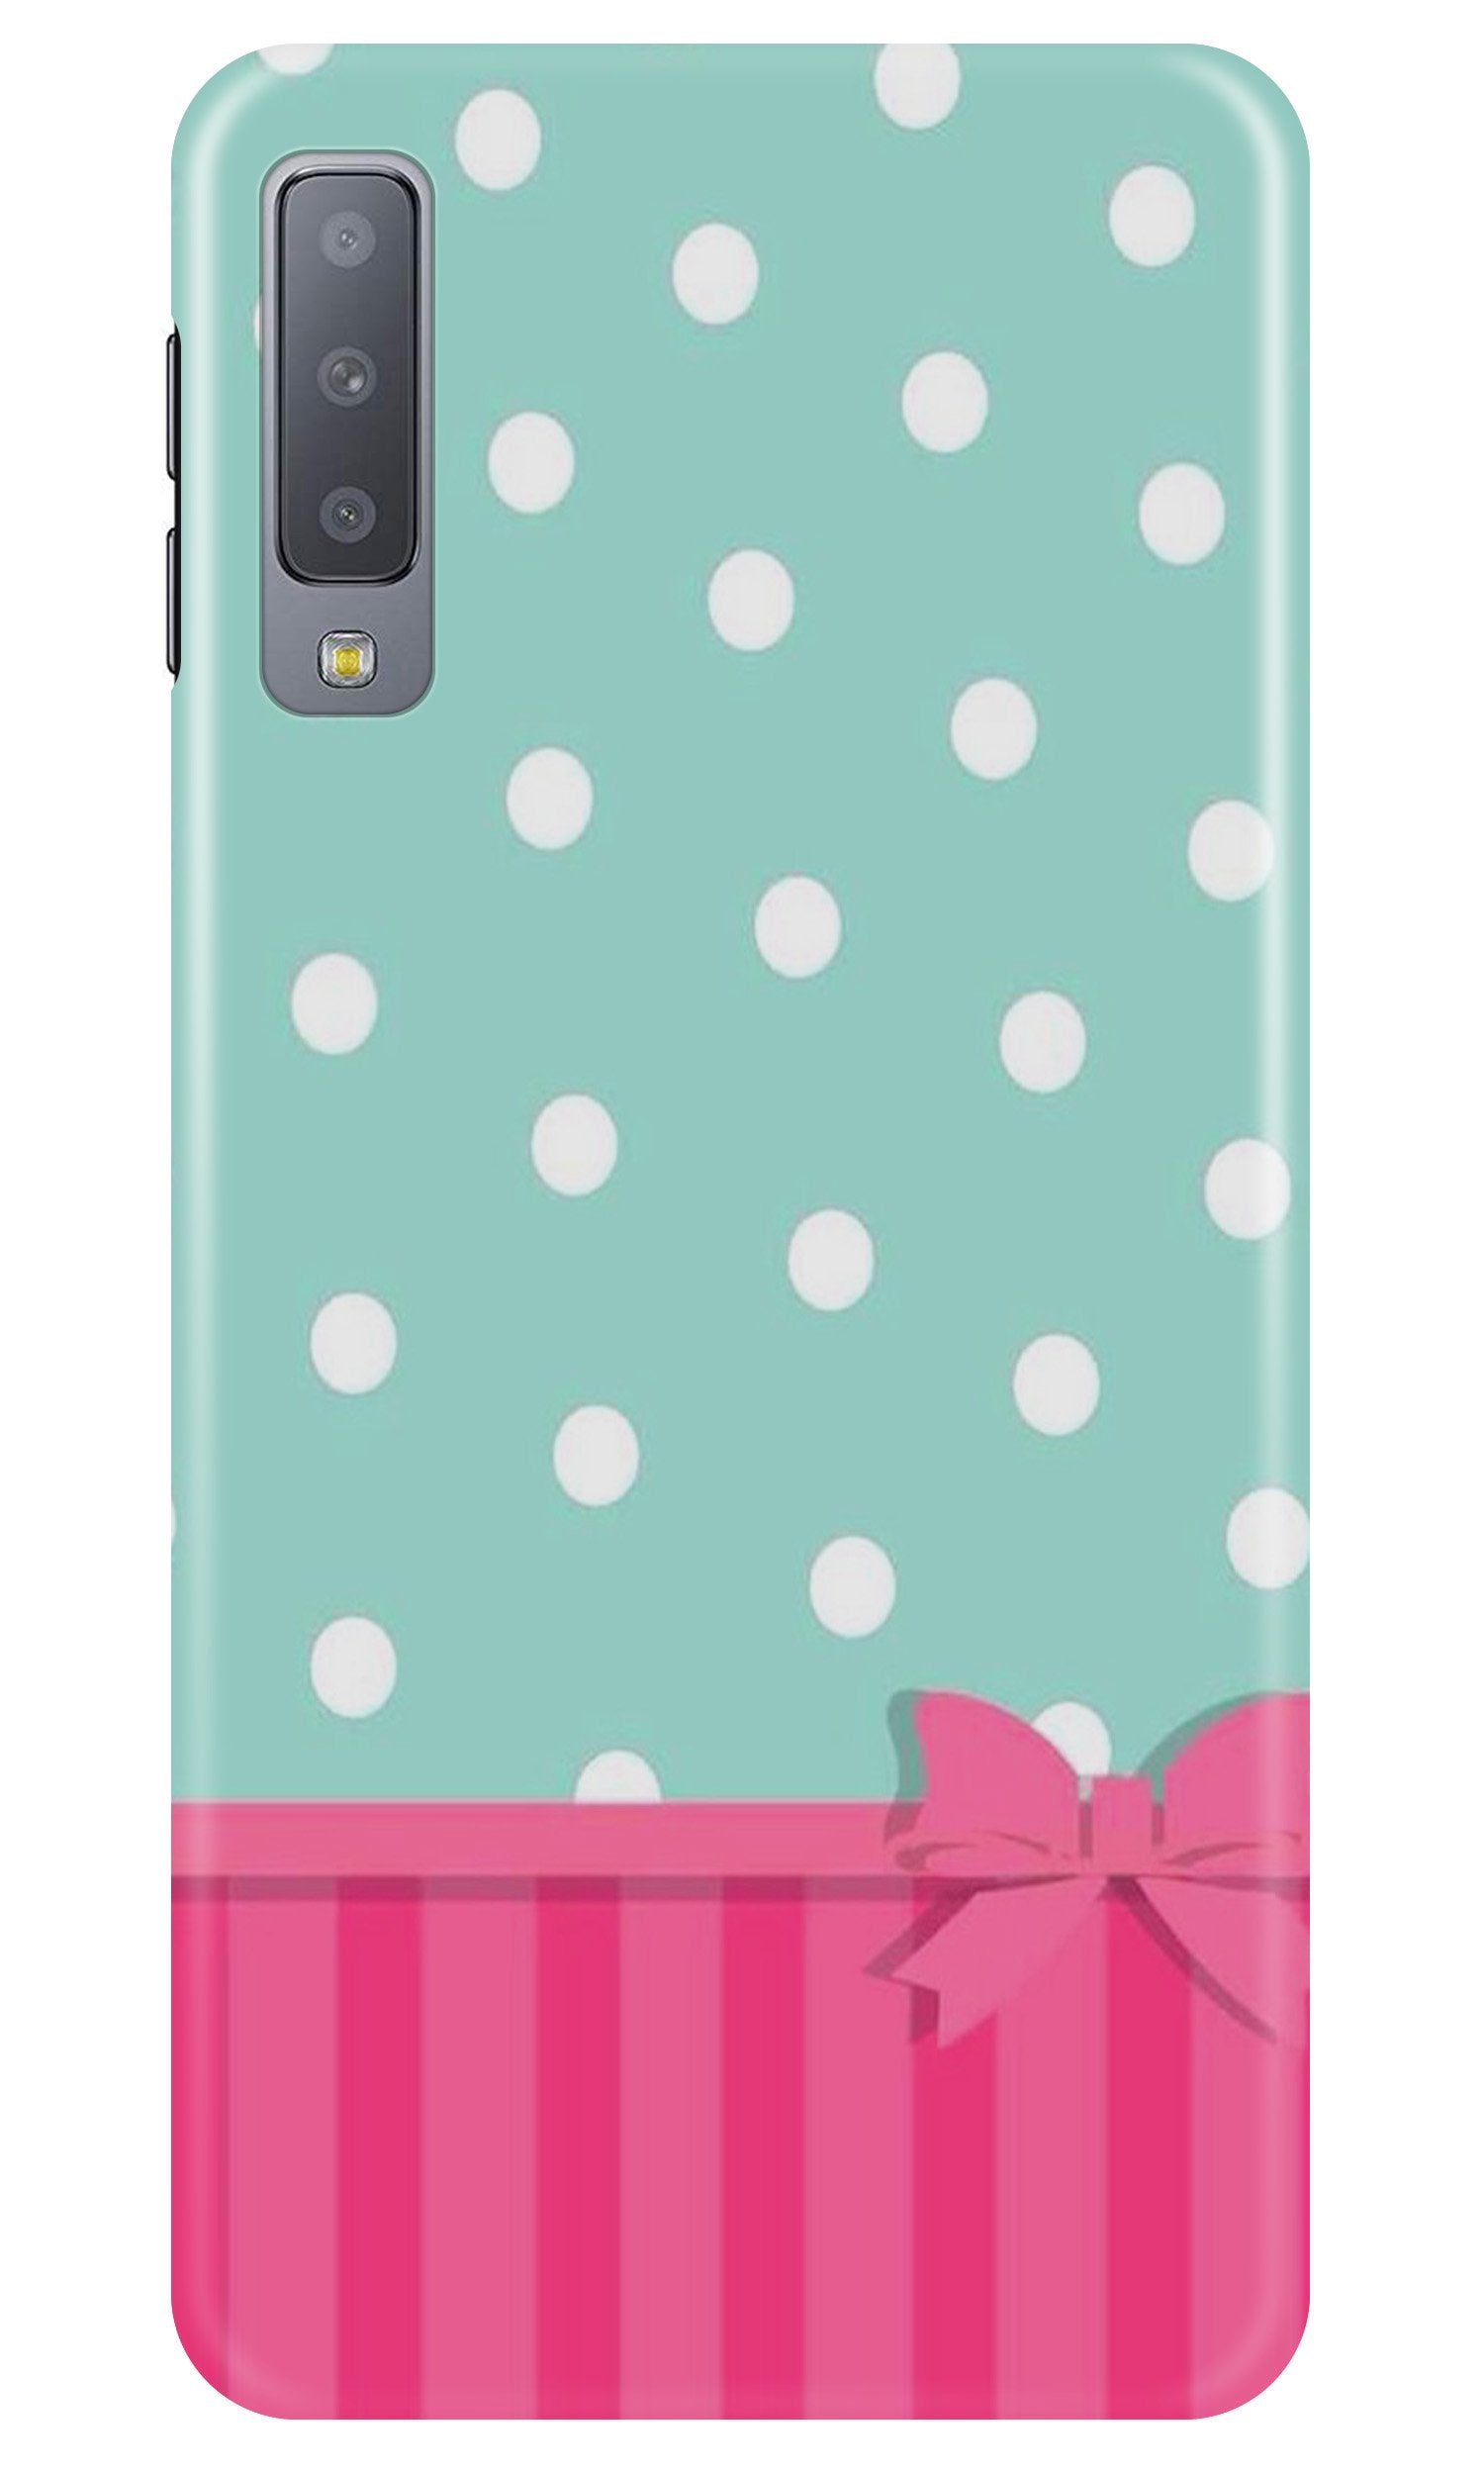 Gift Wrap Case for Samung Galaxy A70s